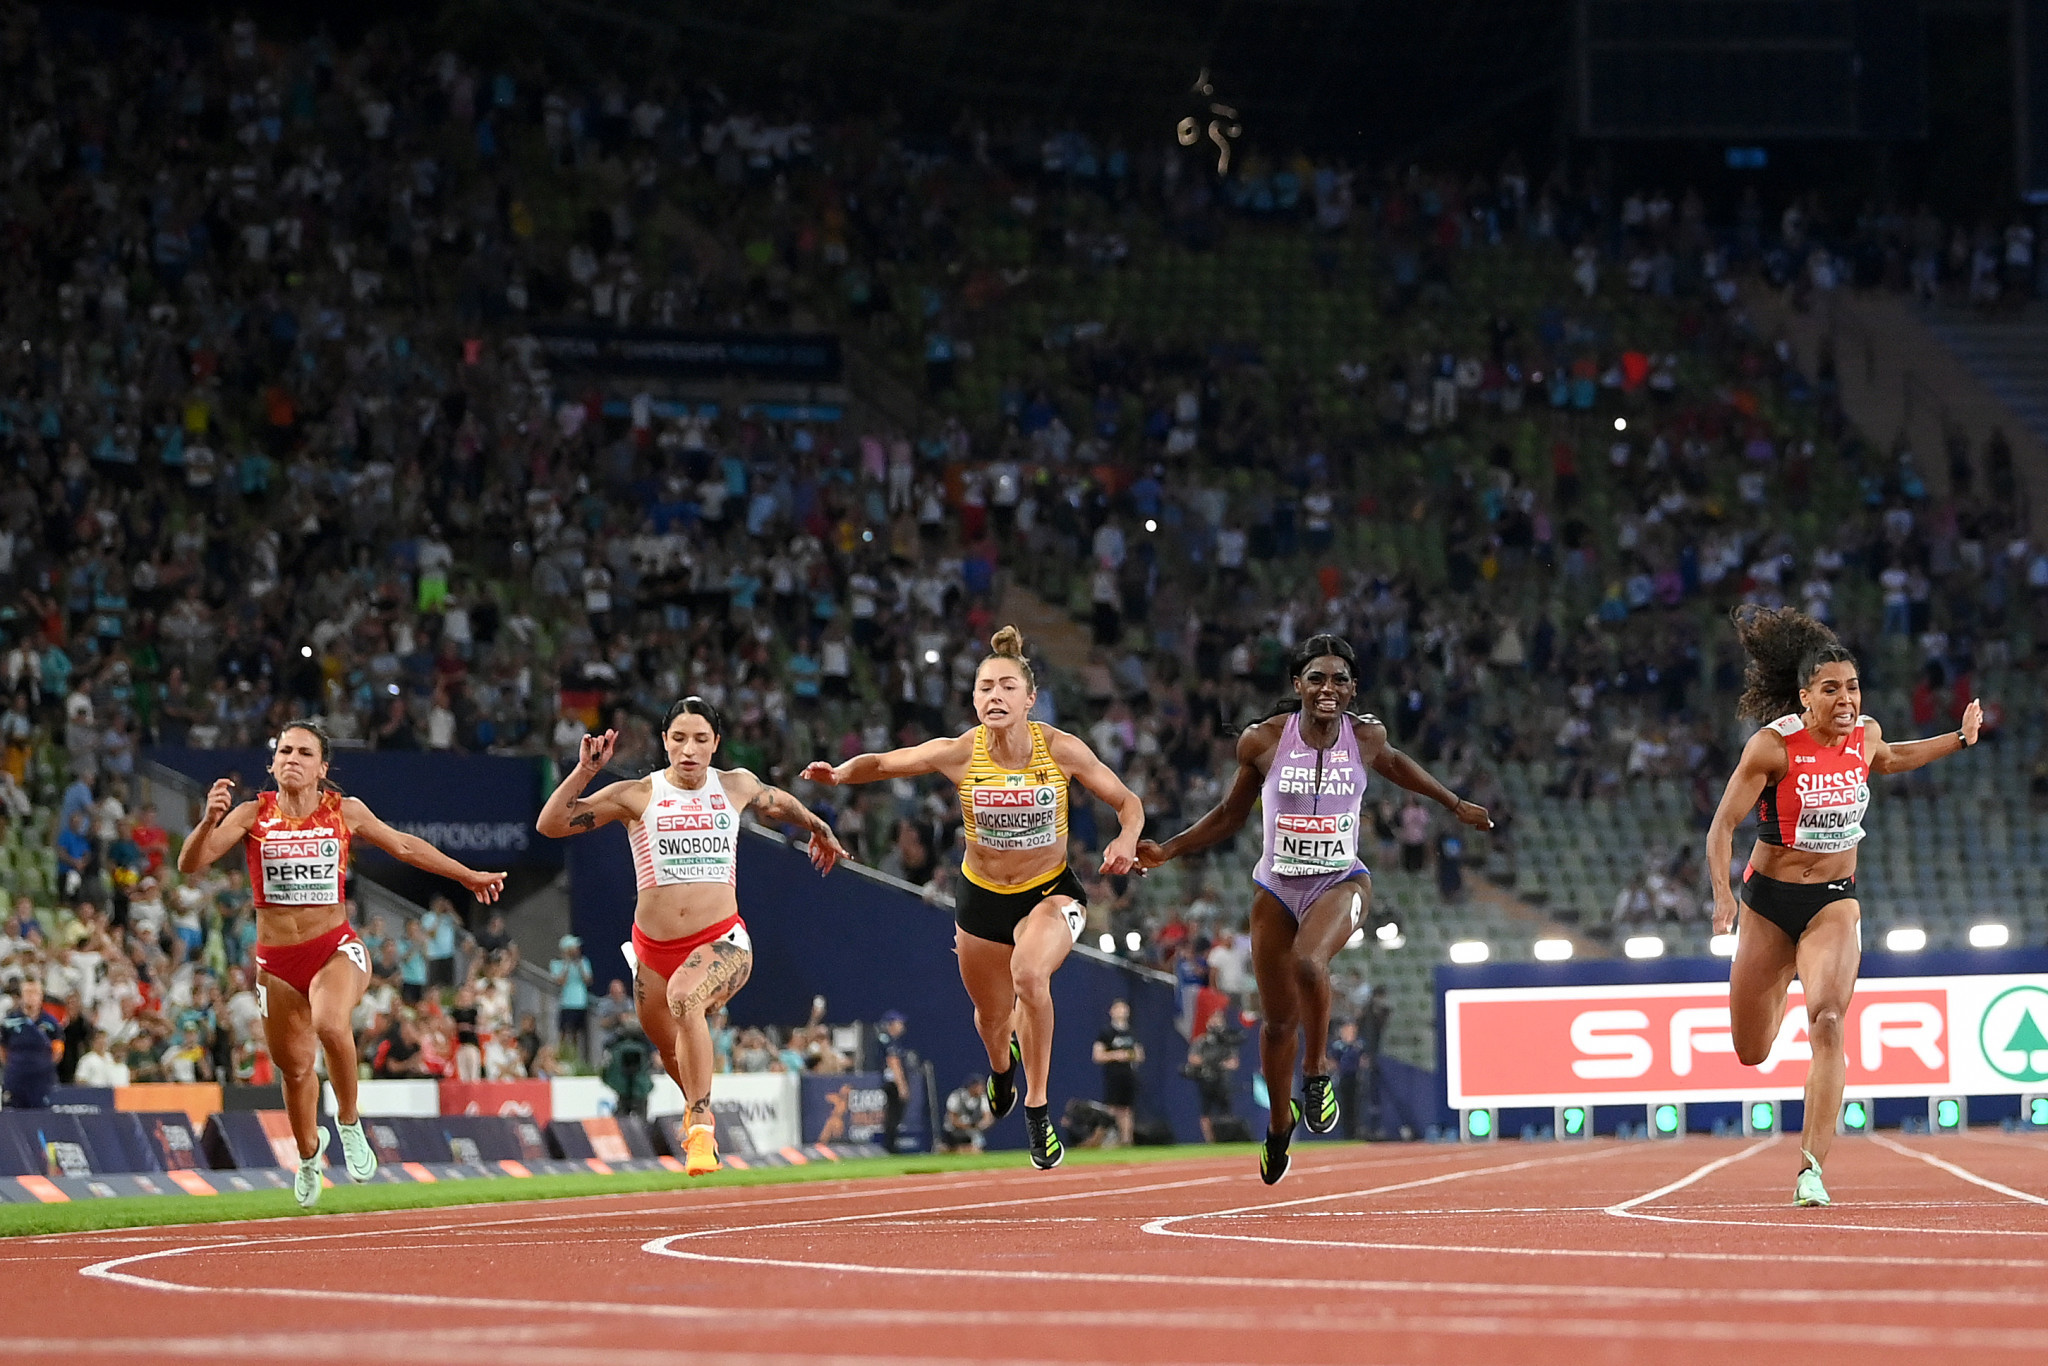 A dramatic women's 100 metres final saw the top three split by 0.01 seconds ©Getty Images